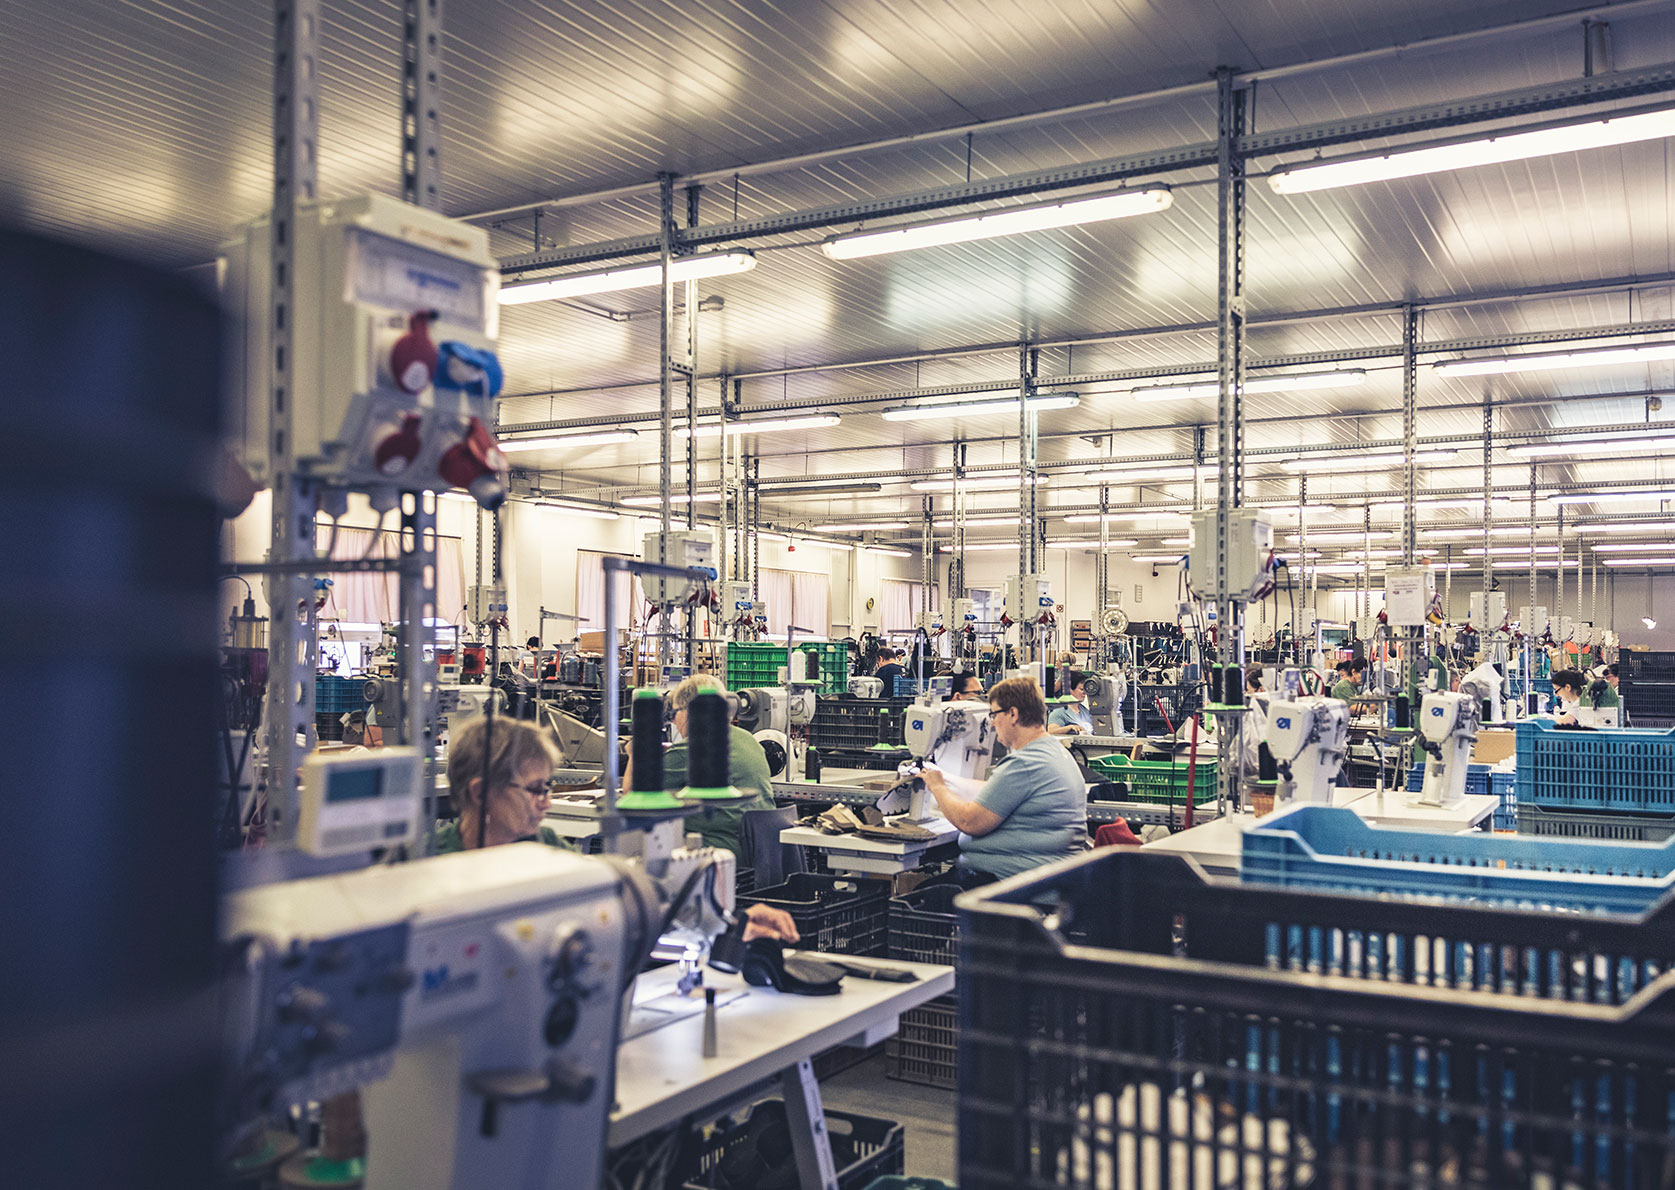 The stitching department of the HANWAG production site in Hajdúböszörmény, Hungary where are hanwag boots made